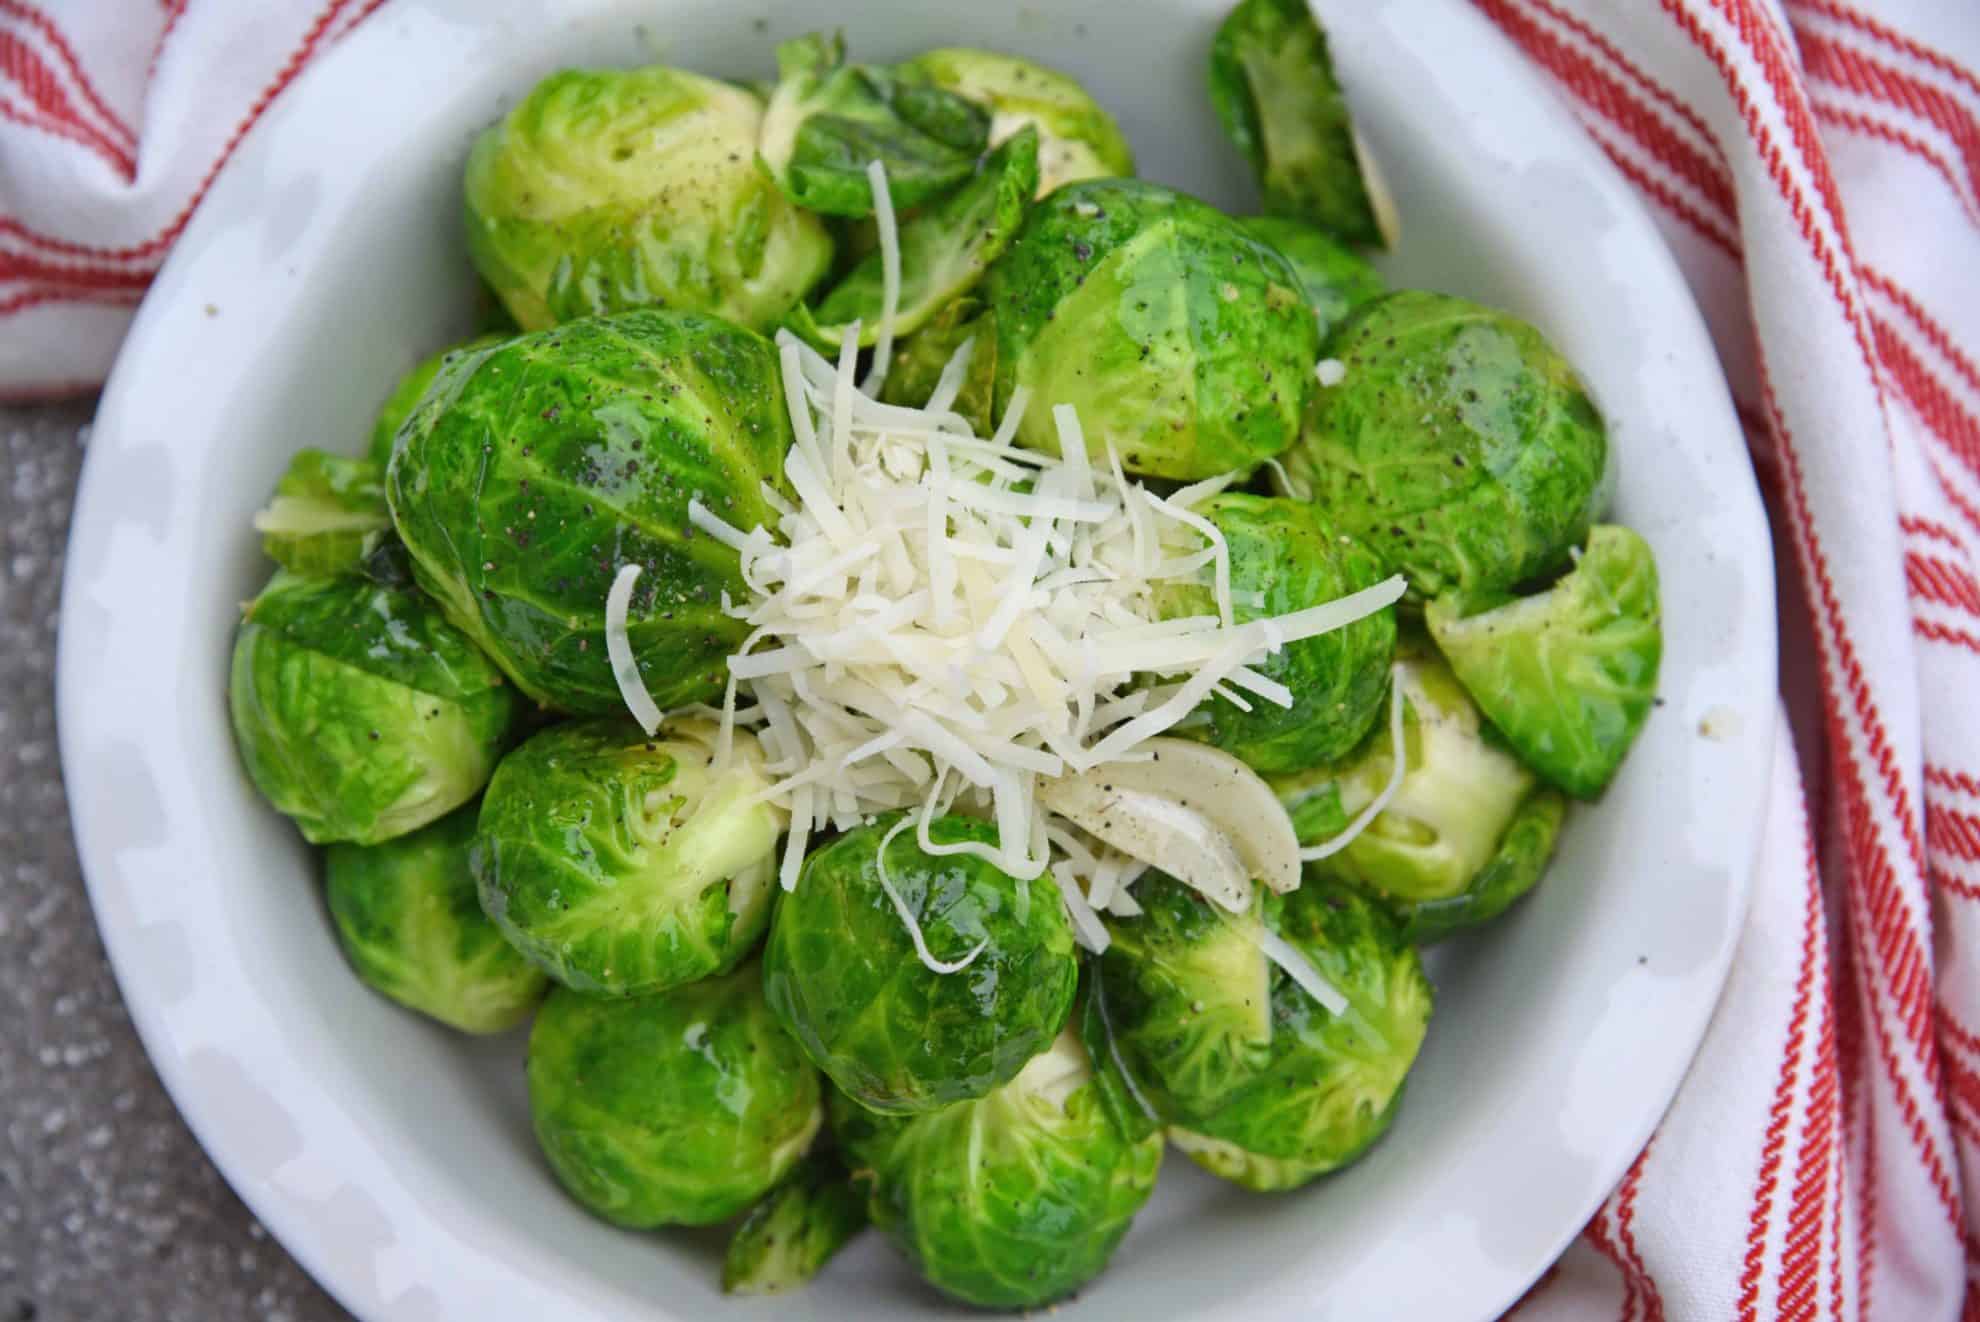 Garlic Butter Brussels Sprouts is an easy side dish that even sprout haters will love! Fresh brussel sprouts covered in butter, garlic, and topped with parmesan cheese. #brusselssproutsrecipes #garlicbutter www.savoryexperiments.com